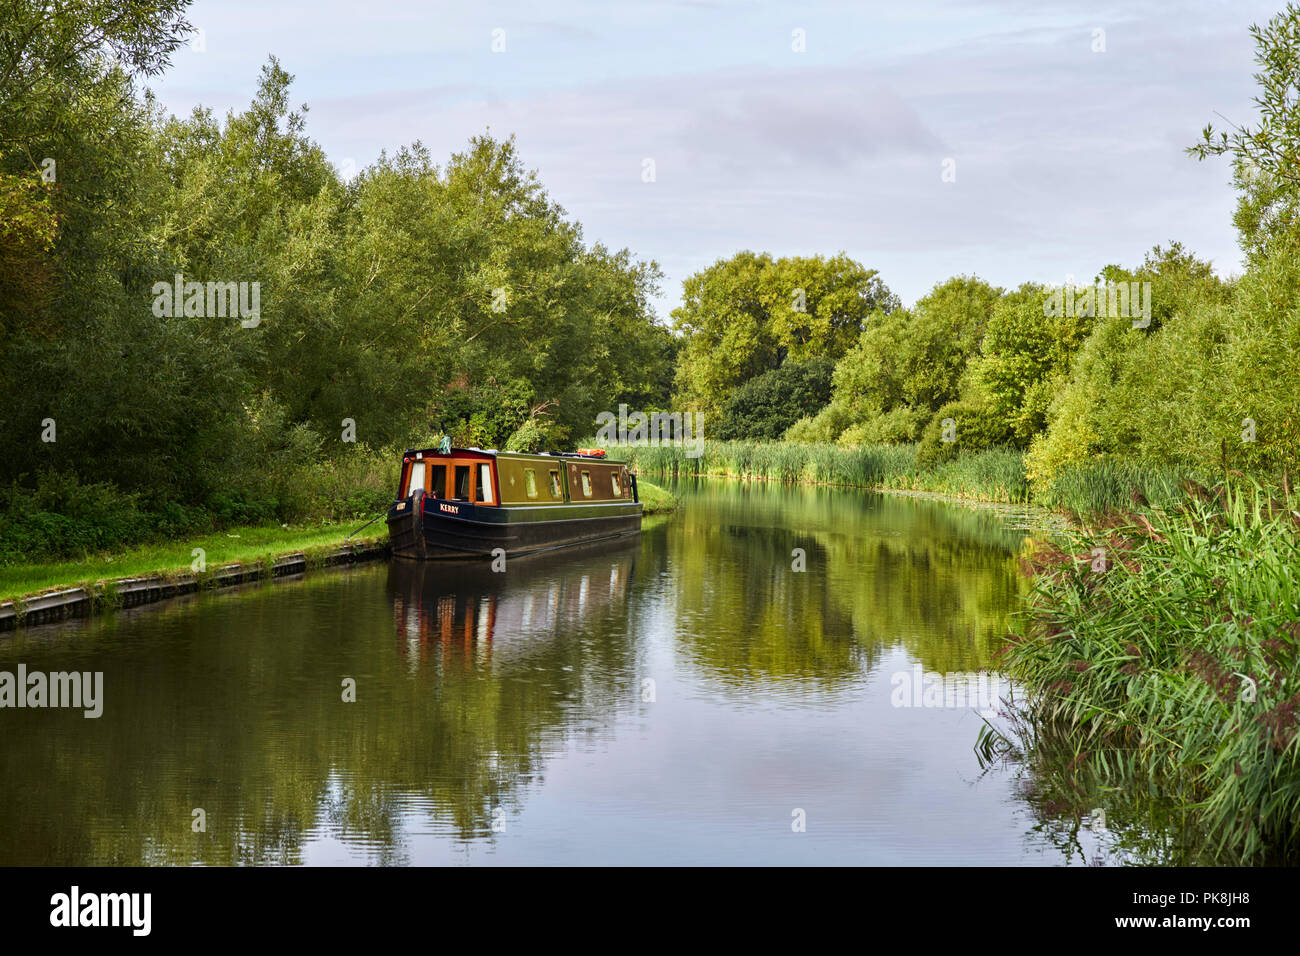 Black Prince hire boat Kerry moored near Tixell Wide, Great Haywood Stock Photo